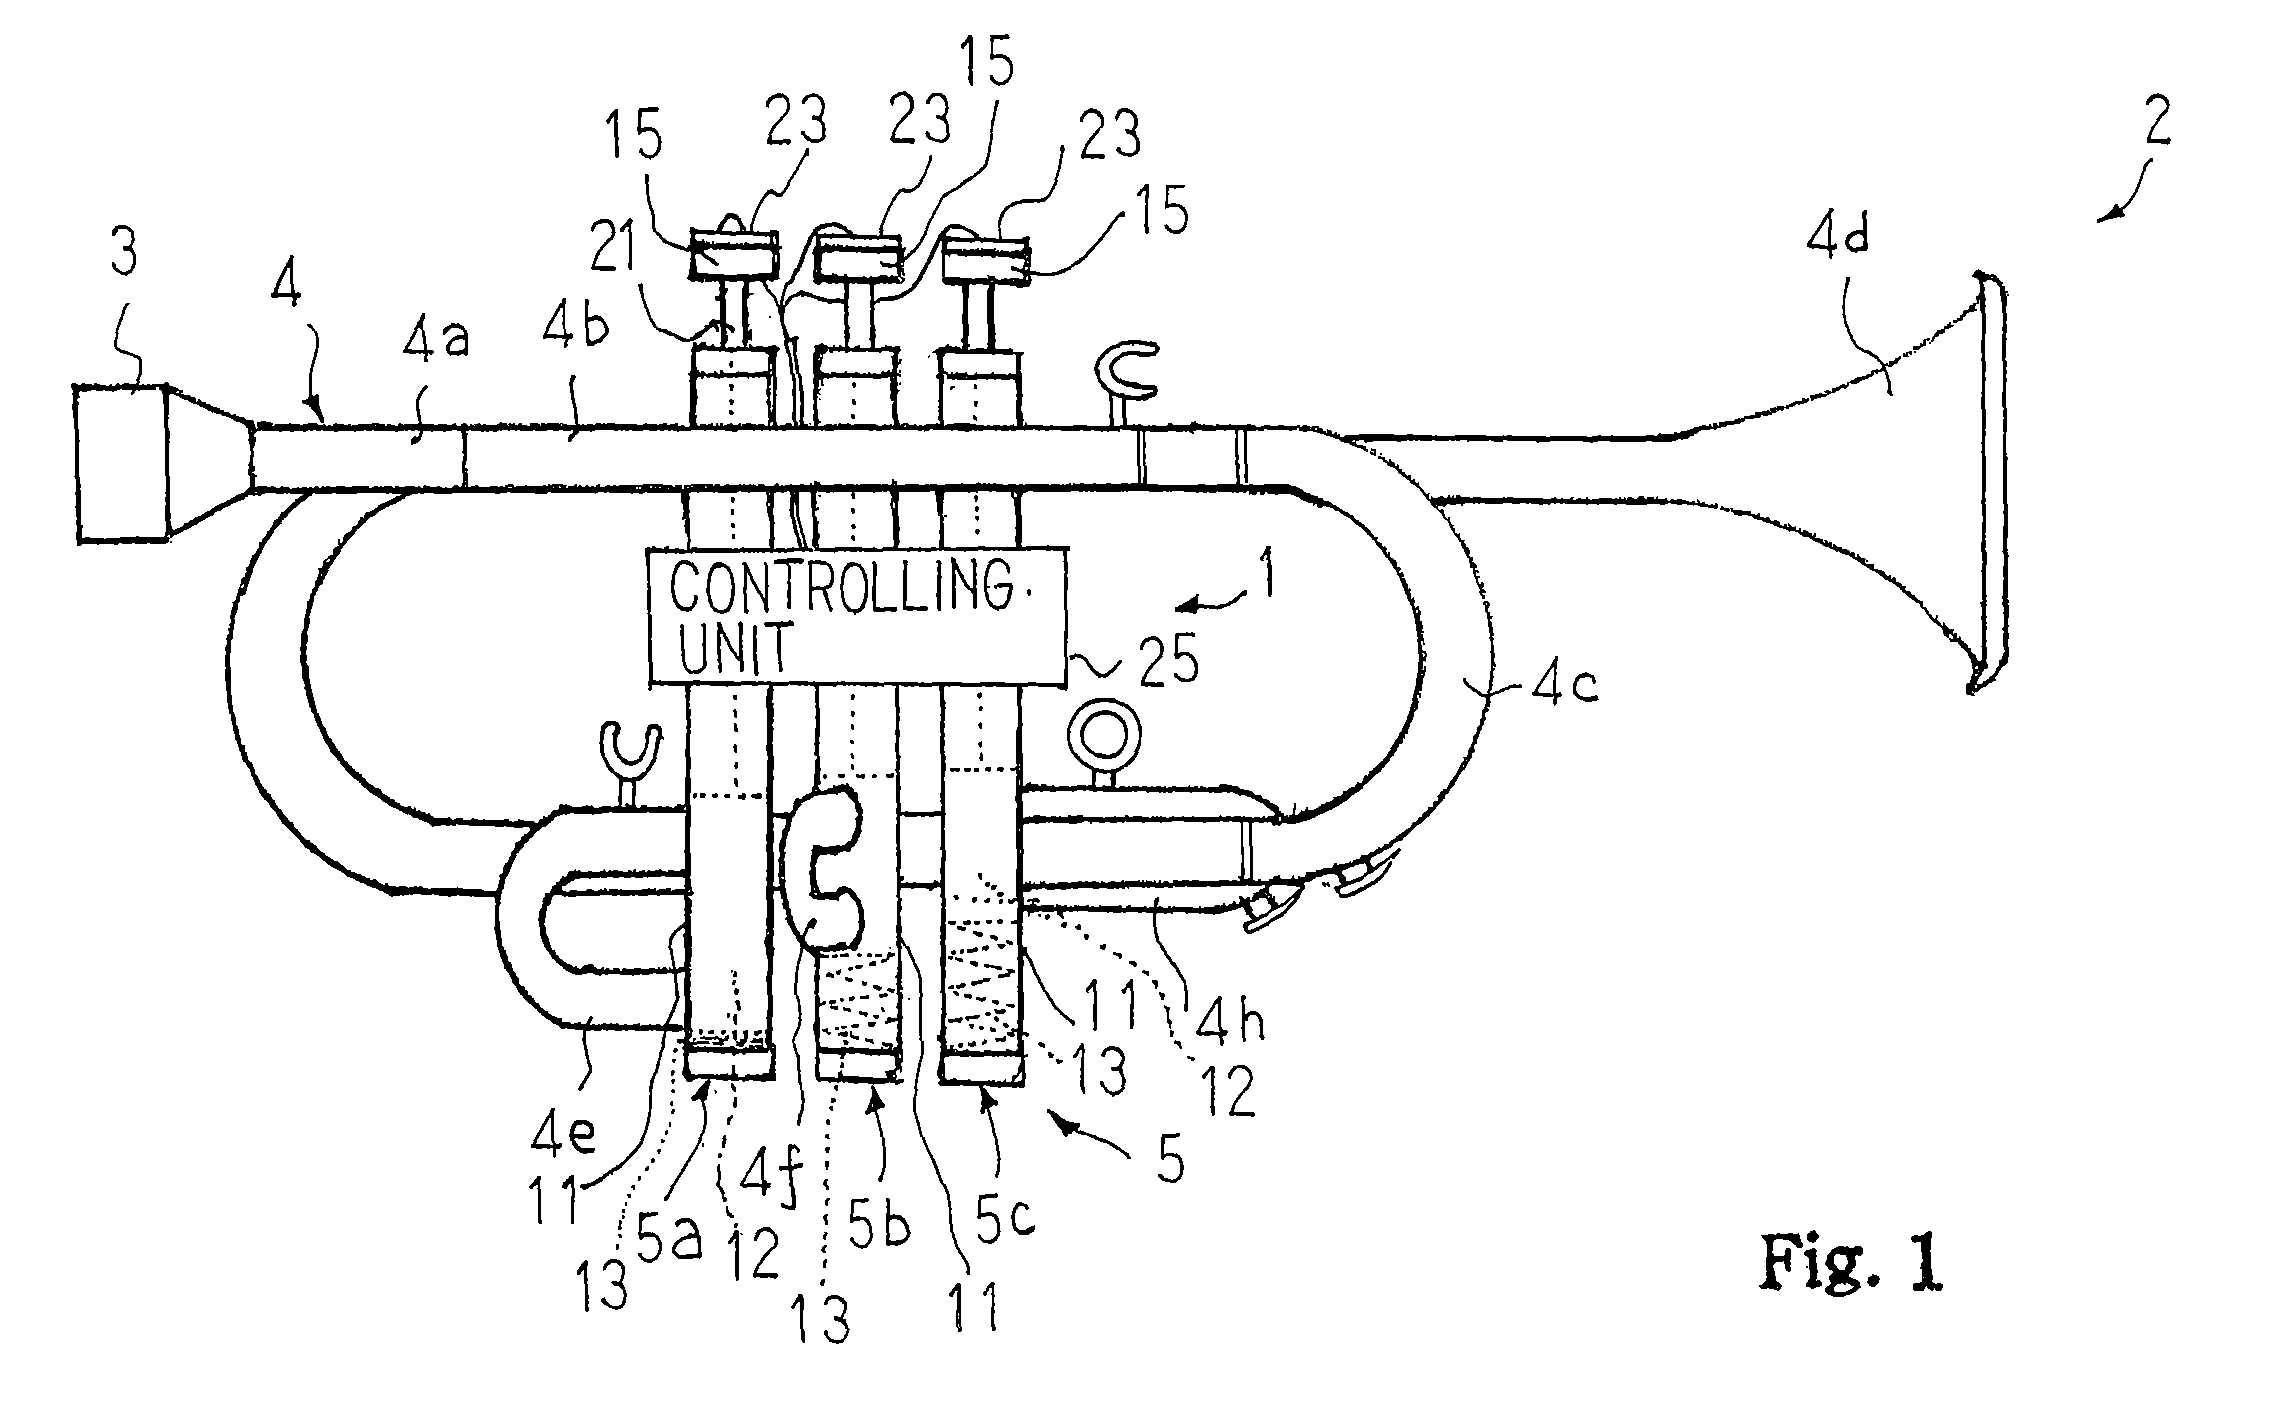 Wind musical instrument with pitch changing mechanism and supporting system for pitch change